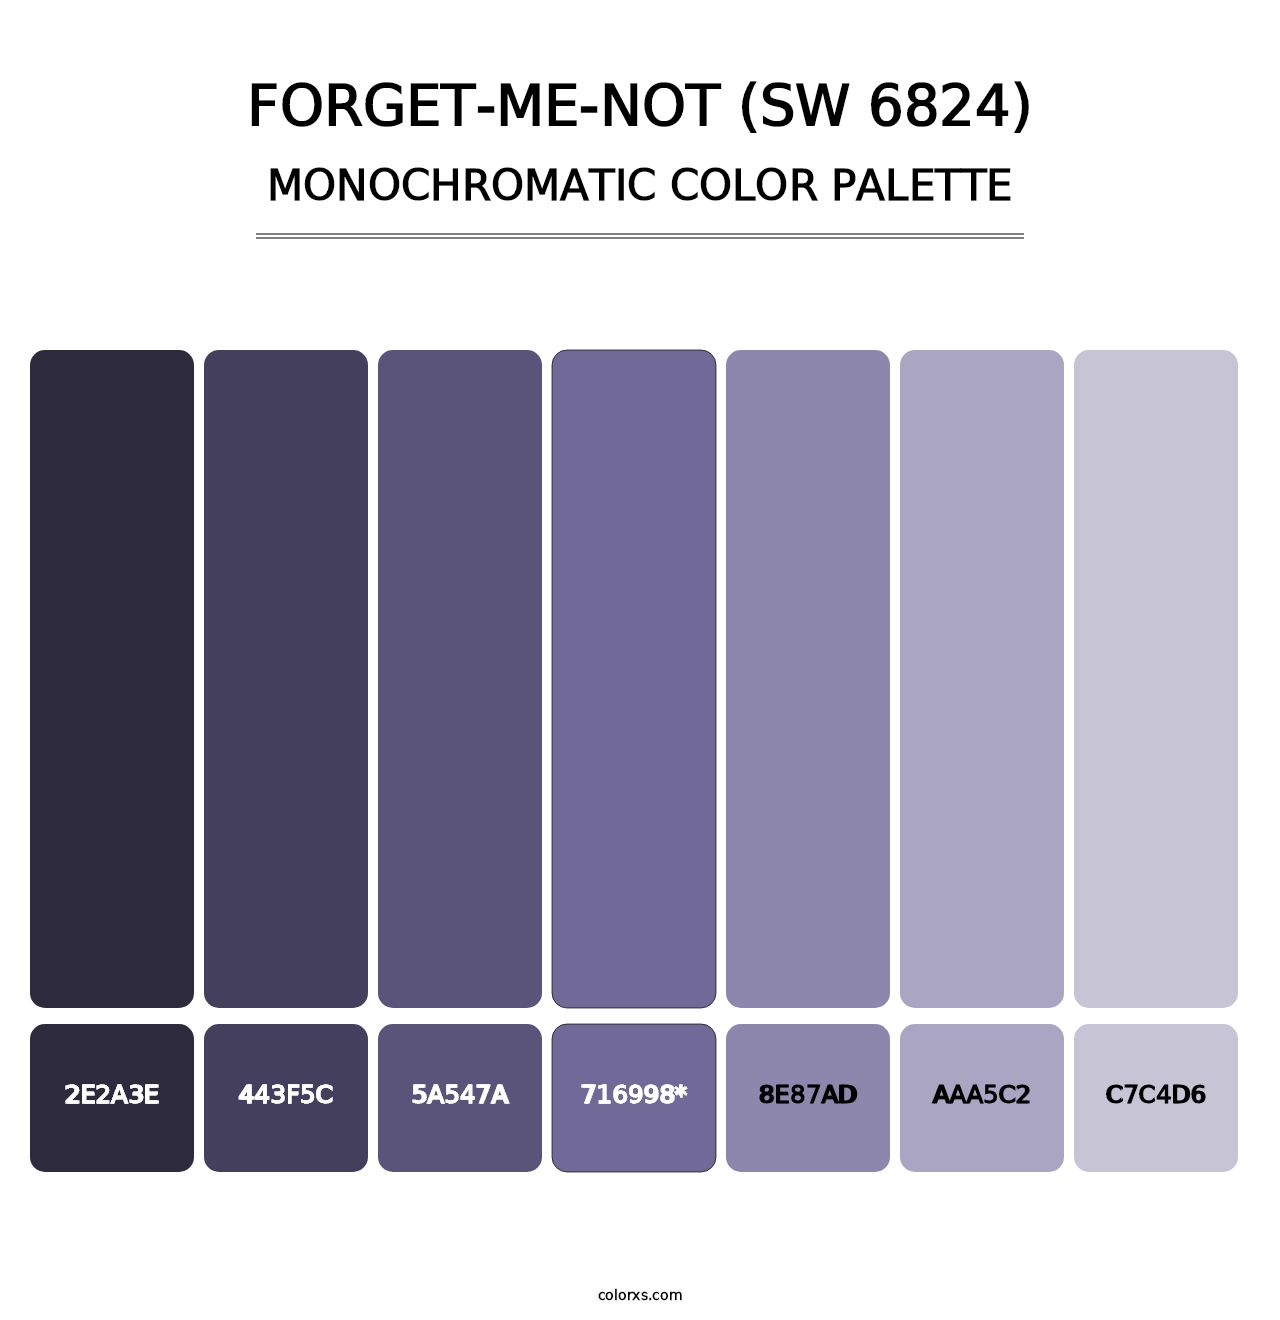 Forget-Me-Not (SW 6824) - Monochromatic Color Palette